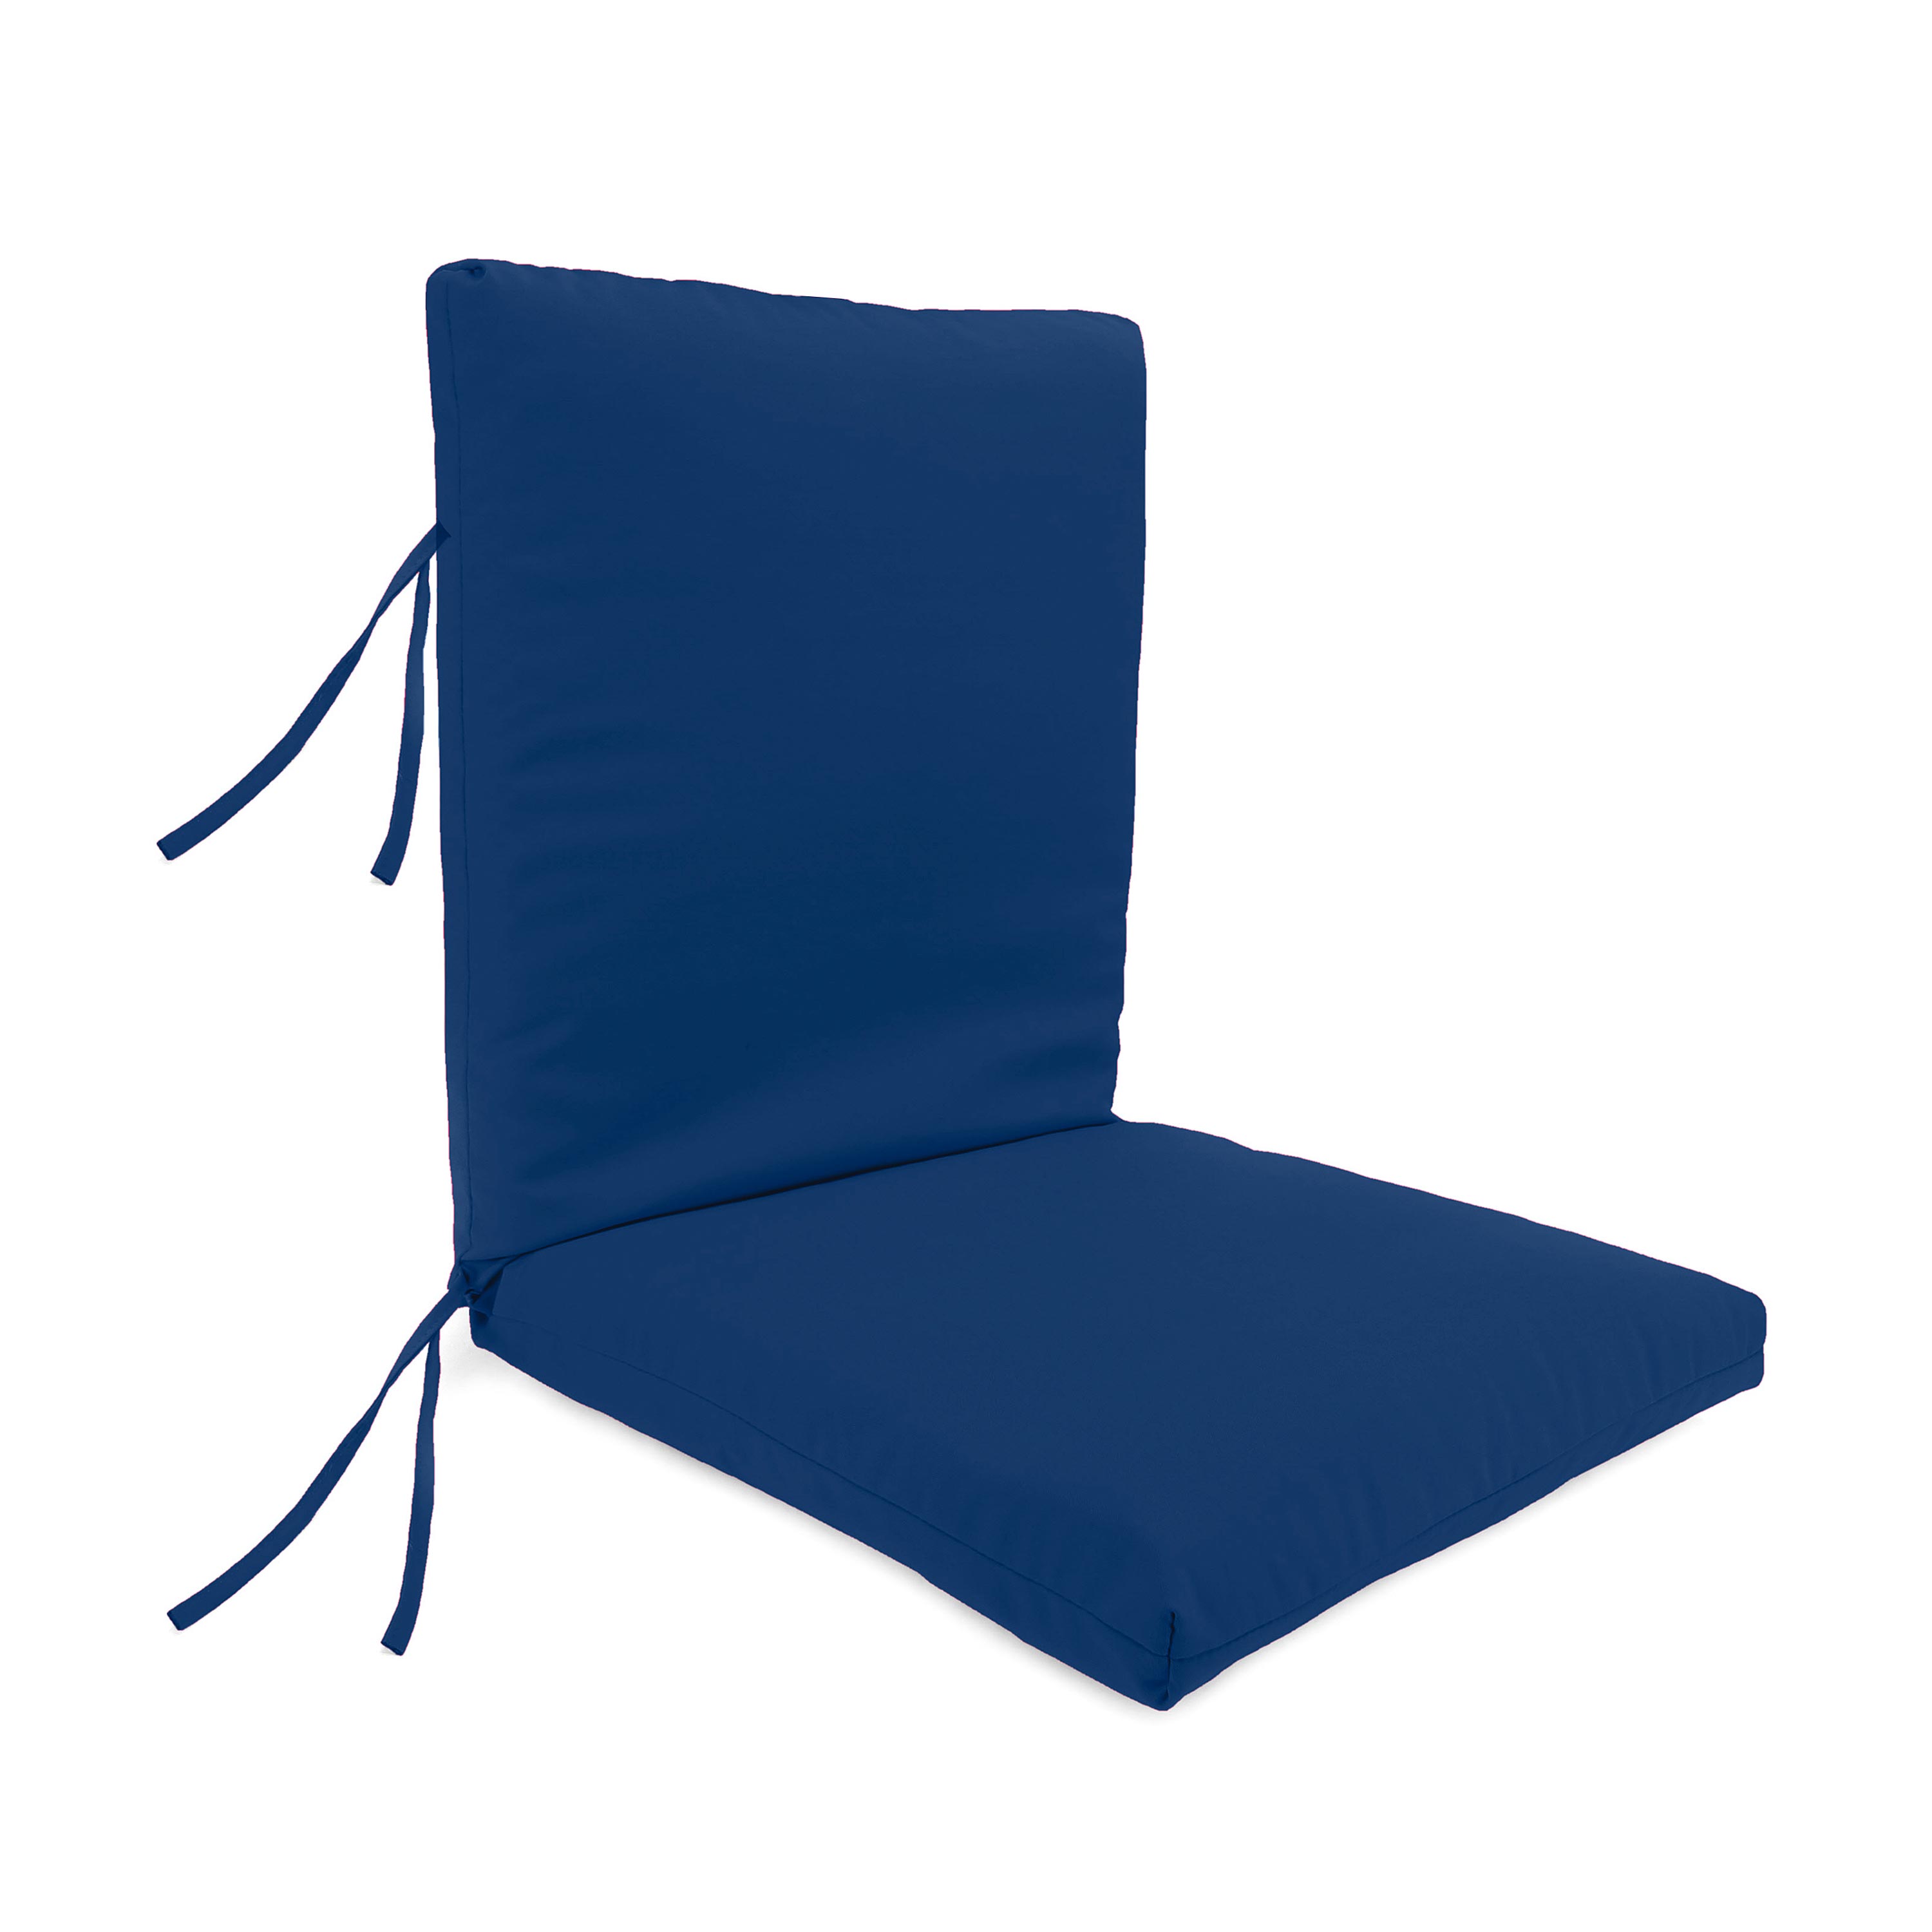 Classic Large Club Chair Cushion w/Ties, 44" x 22", in Midnight Navy